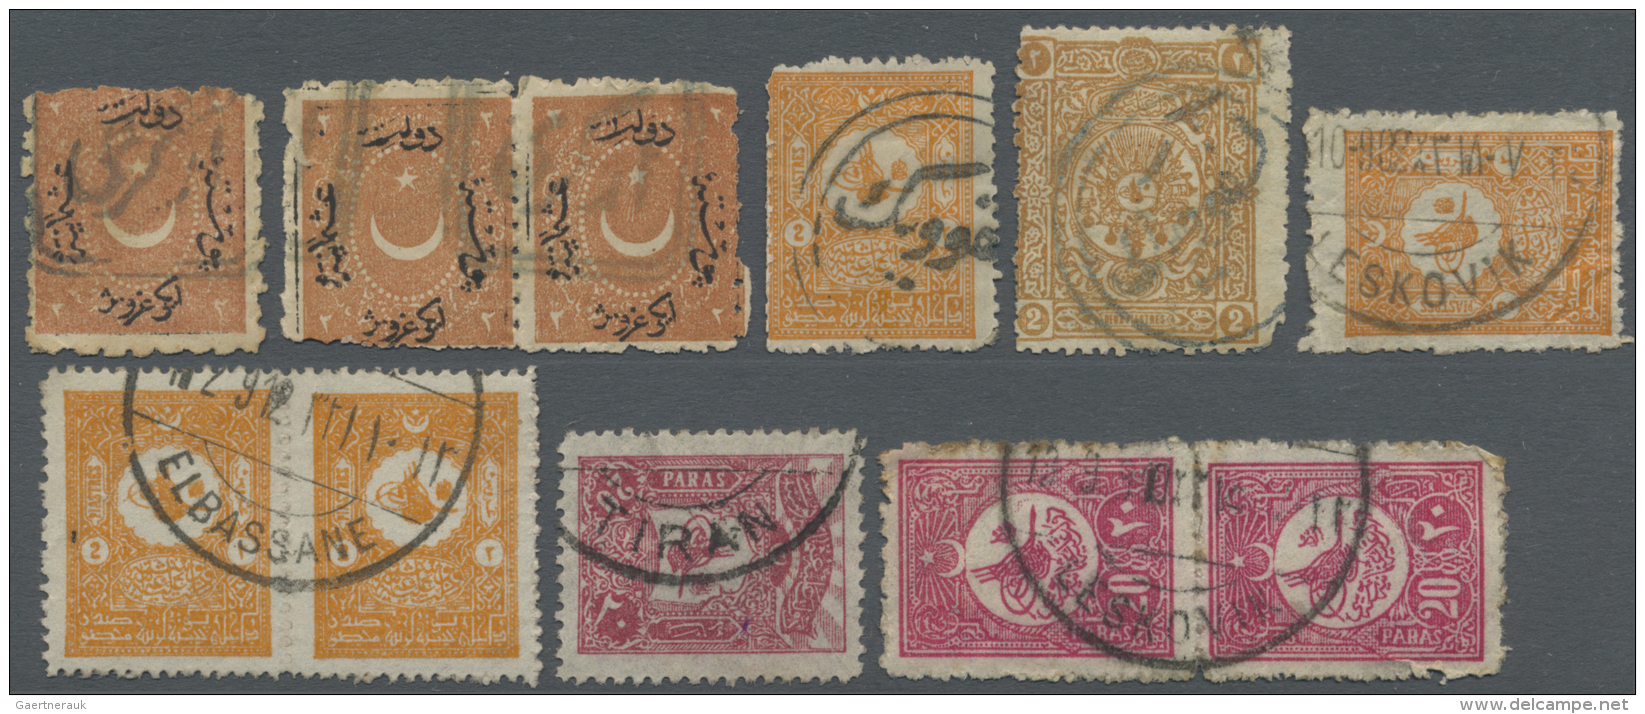 Albanien - Stempel: 1870-1910, Collection Of Ottoman Turkey Cancellations From ALBANIA On Stamps, Rare Small Towns Inclu - Albanien